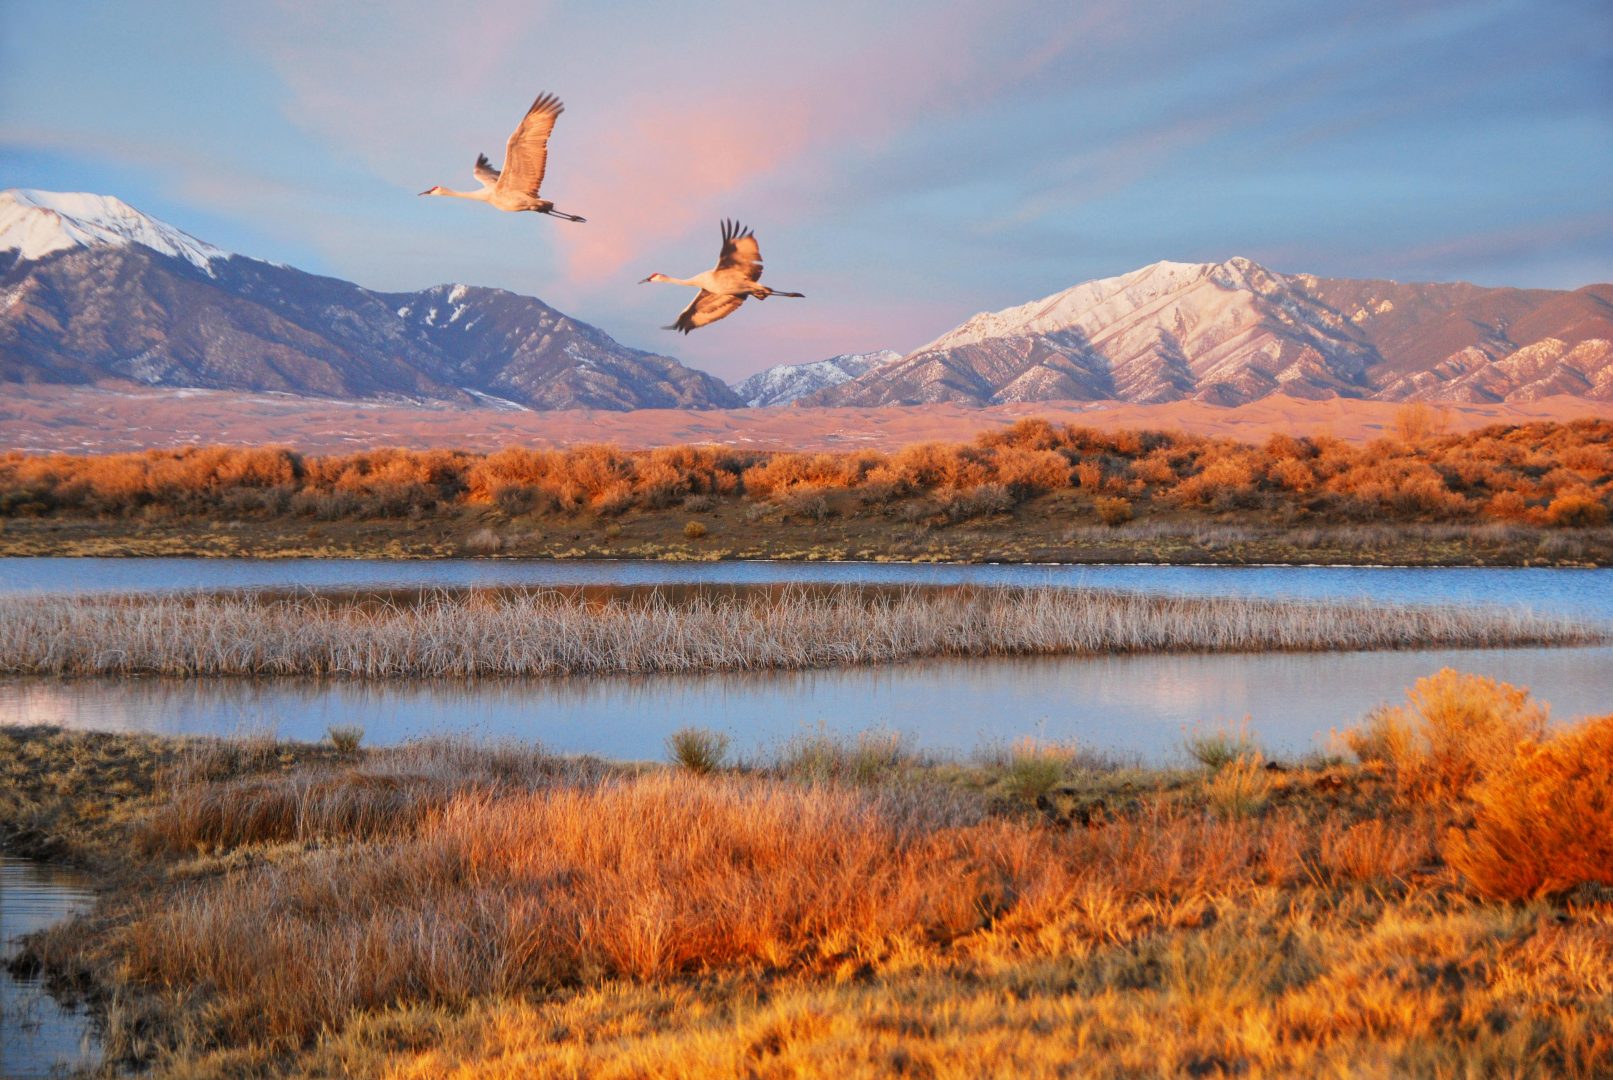 Geese flying over water, mountains